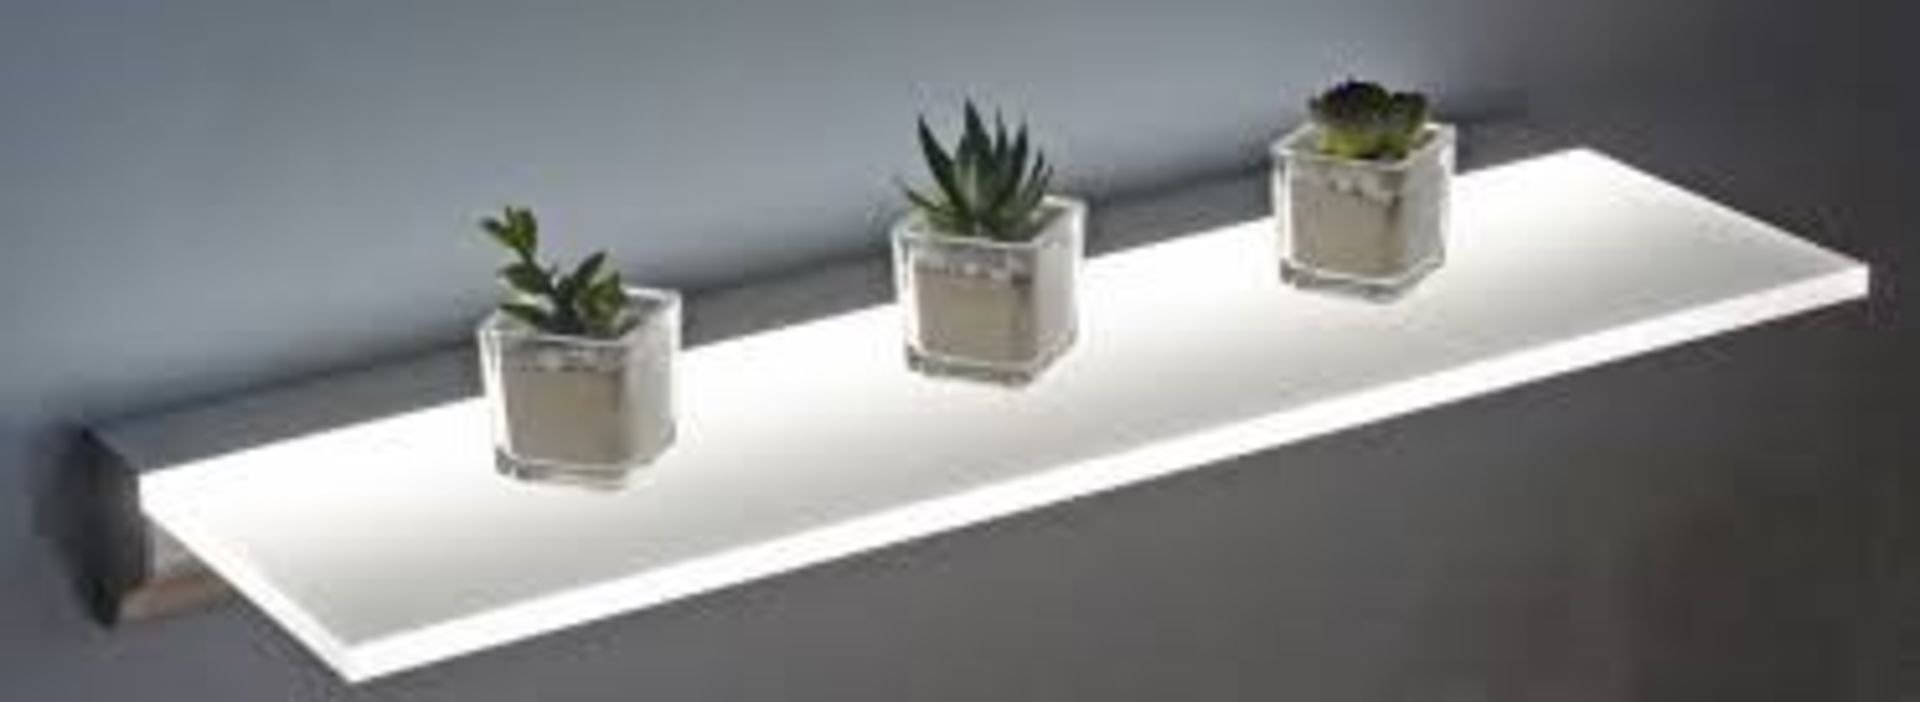 1 BOXED SIRIUS LED FLOATING SHELF / SIZE 900MM - SY7418A / RRP £108.00 (PUBLIC VIEWING AVAILABLE)